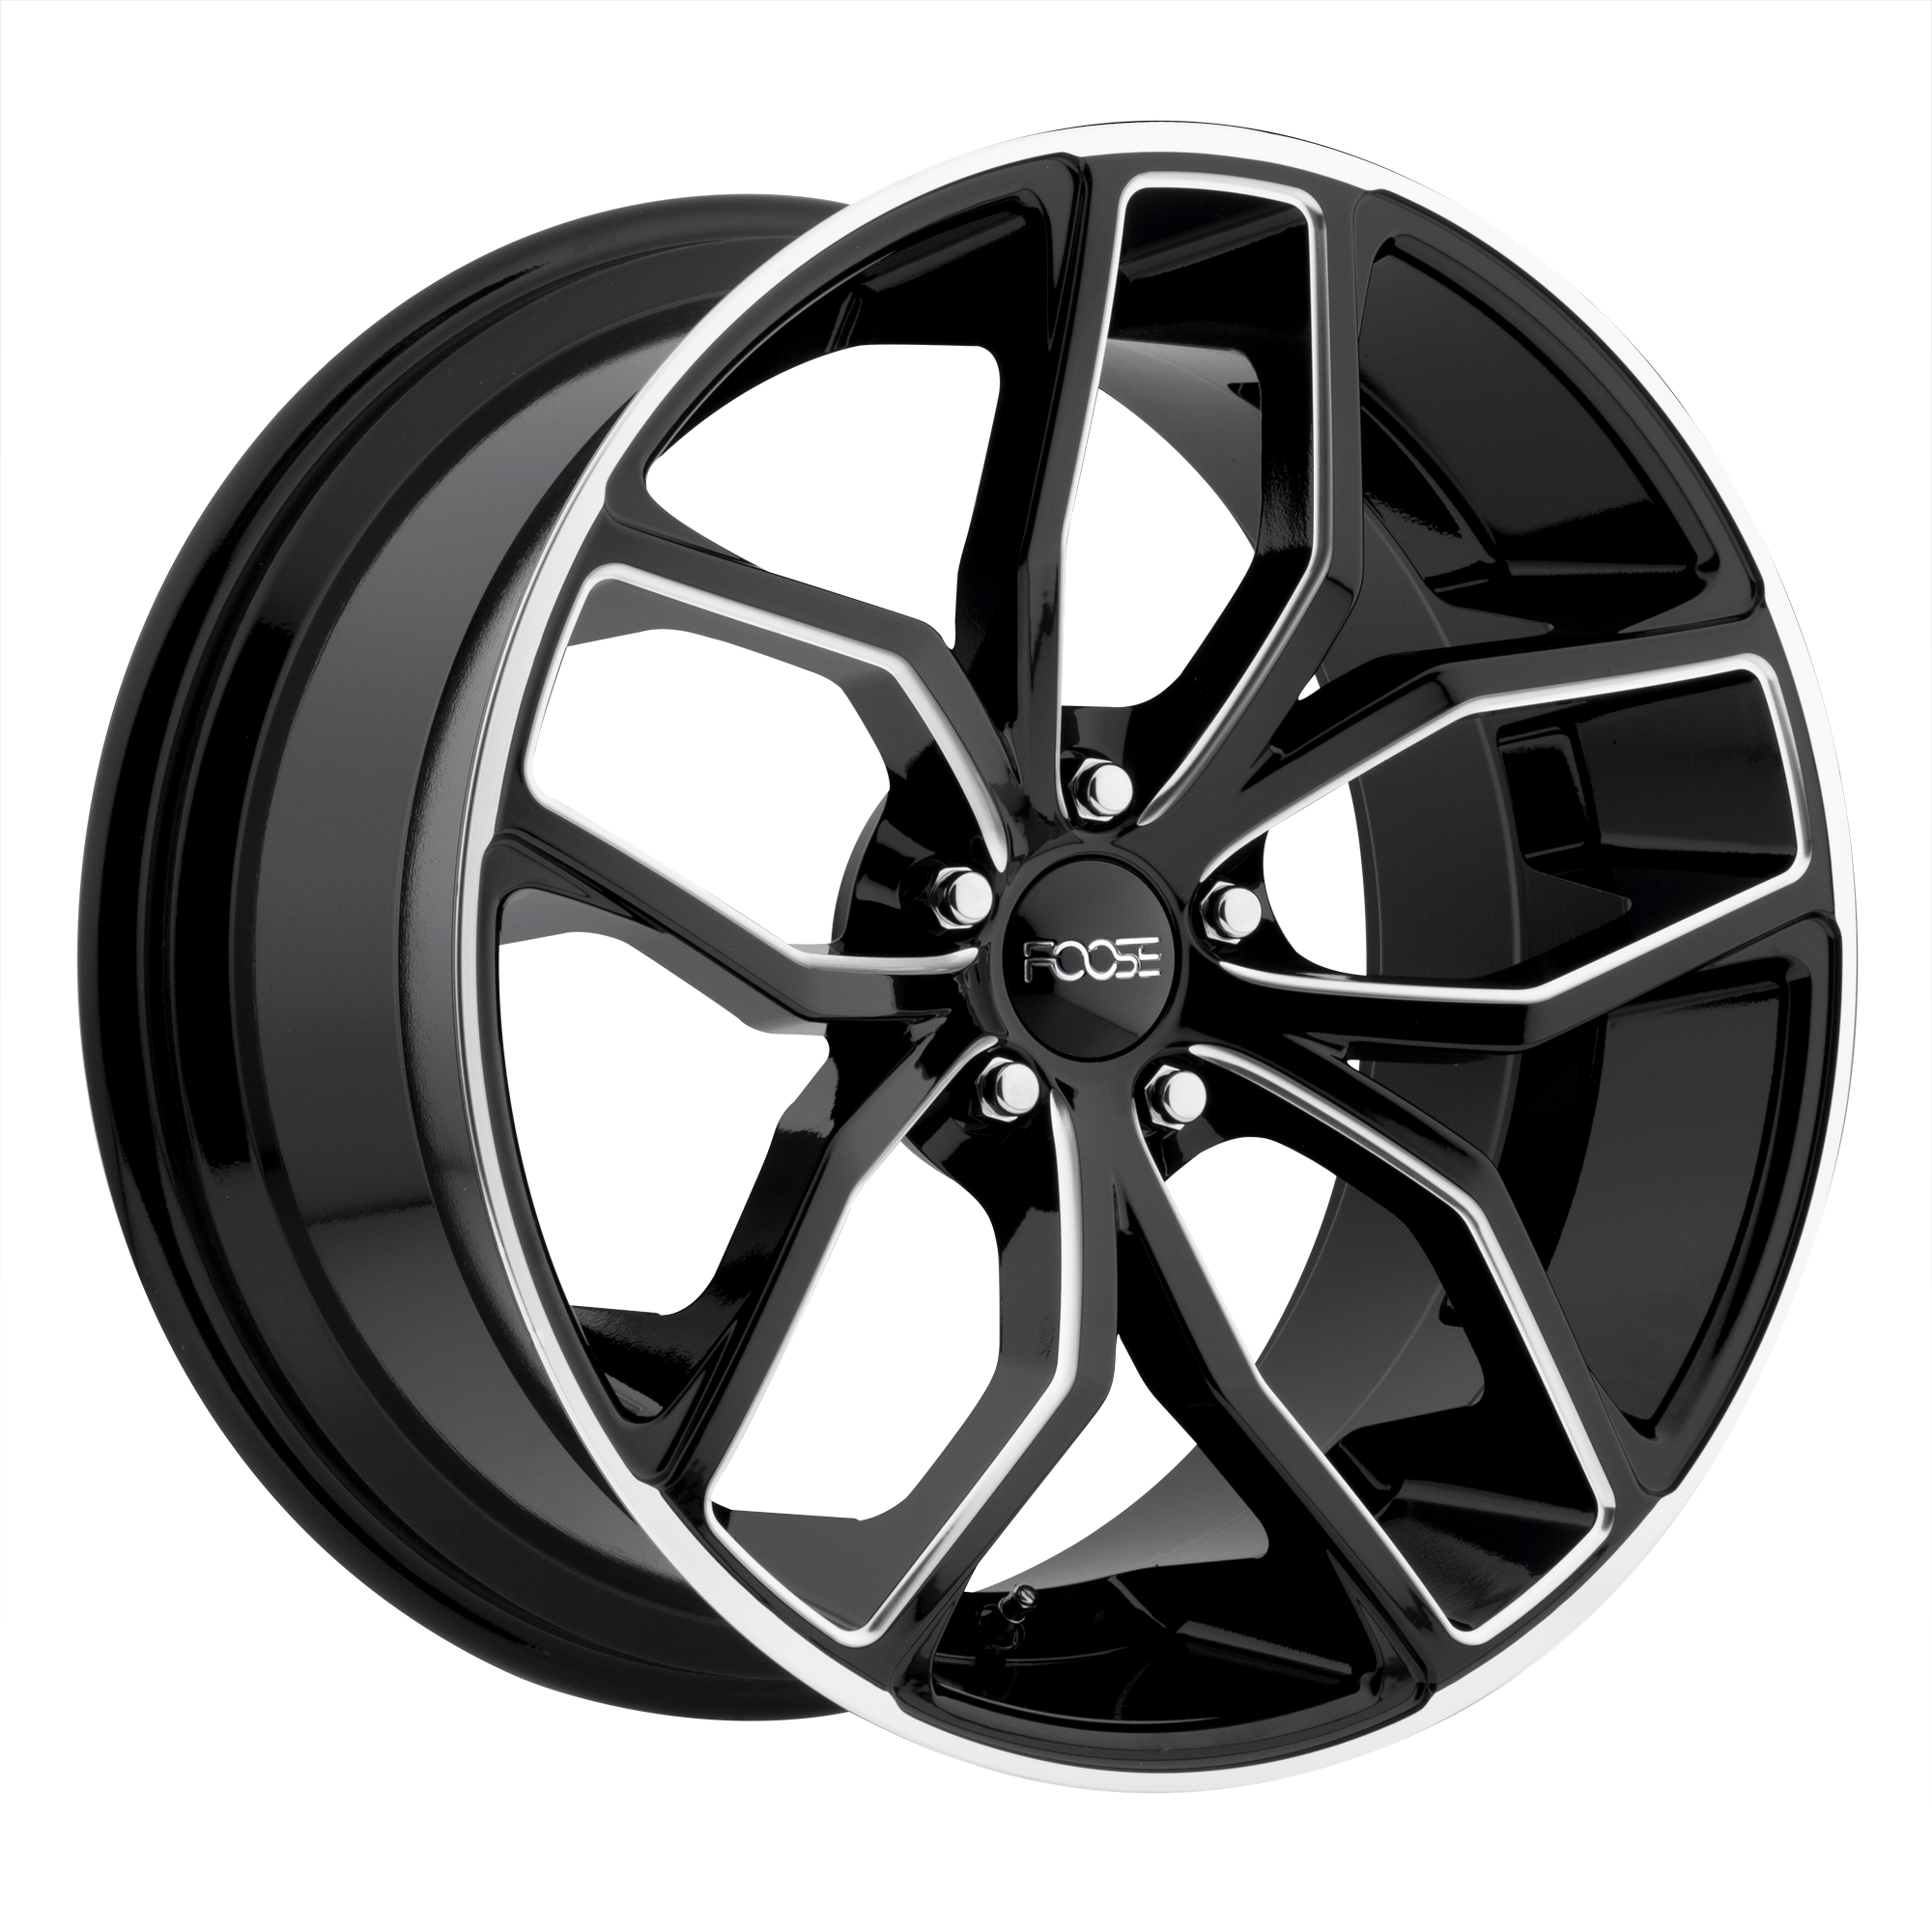 OUTCAST 20x8.5 5x120.00 GLOSS BLACK MILLED (35 mm) - Tires and Engine Performance